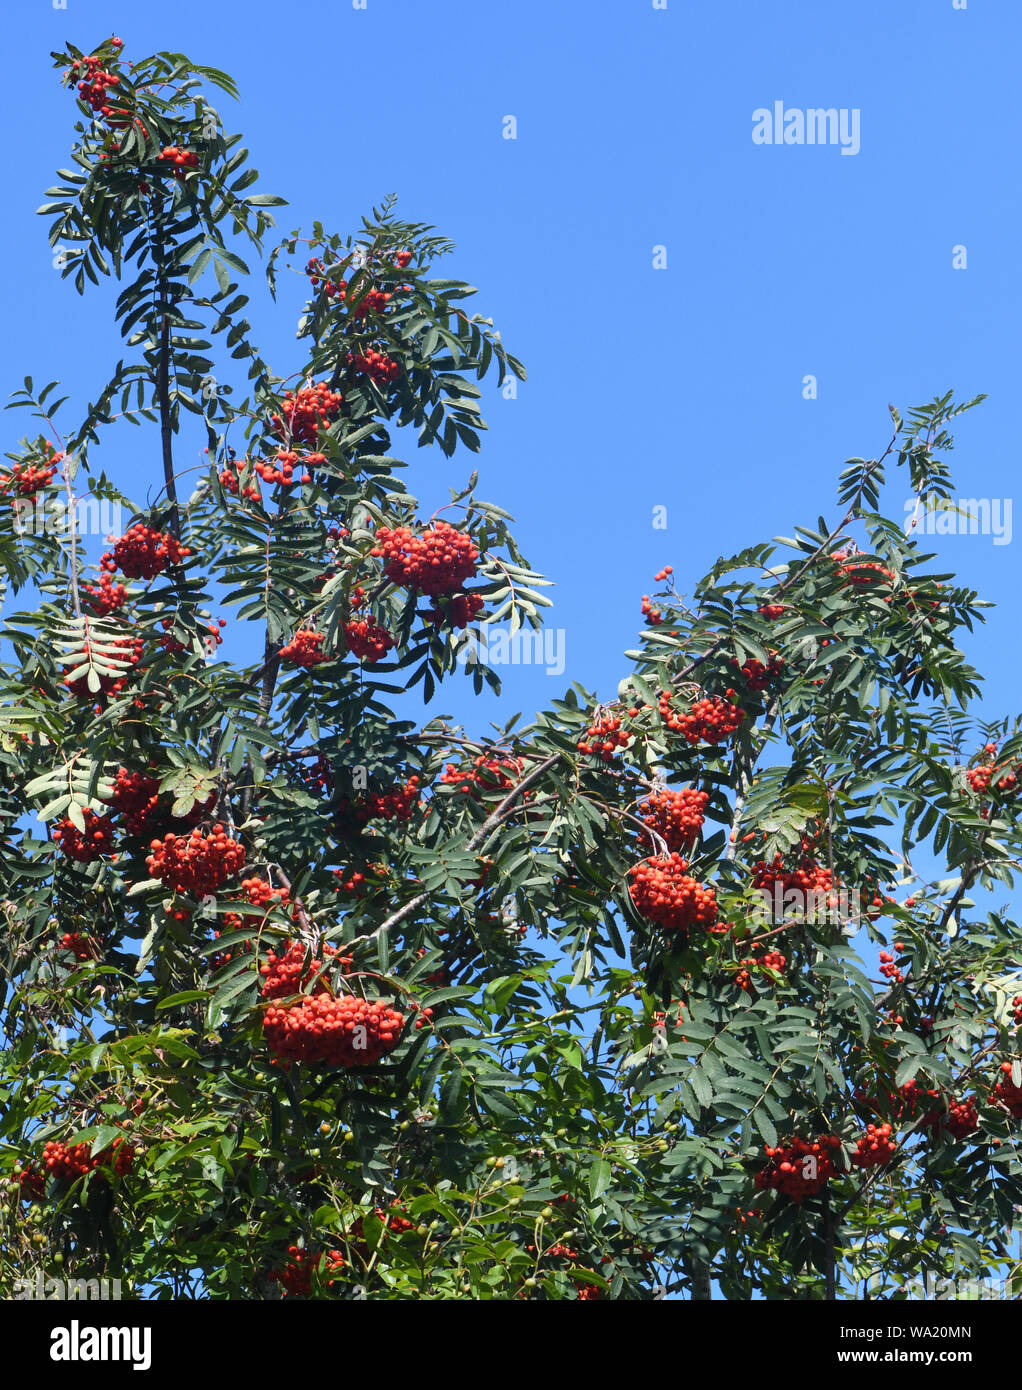 Red berries on a mountain ash or rowan (Sorbus aucuparia) tree in late summer contrast against a bright blue sky. Bedgebury Forest, Kent, UK. Stock Photo